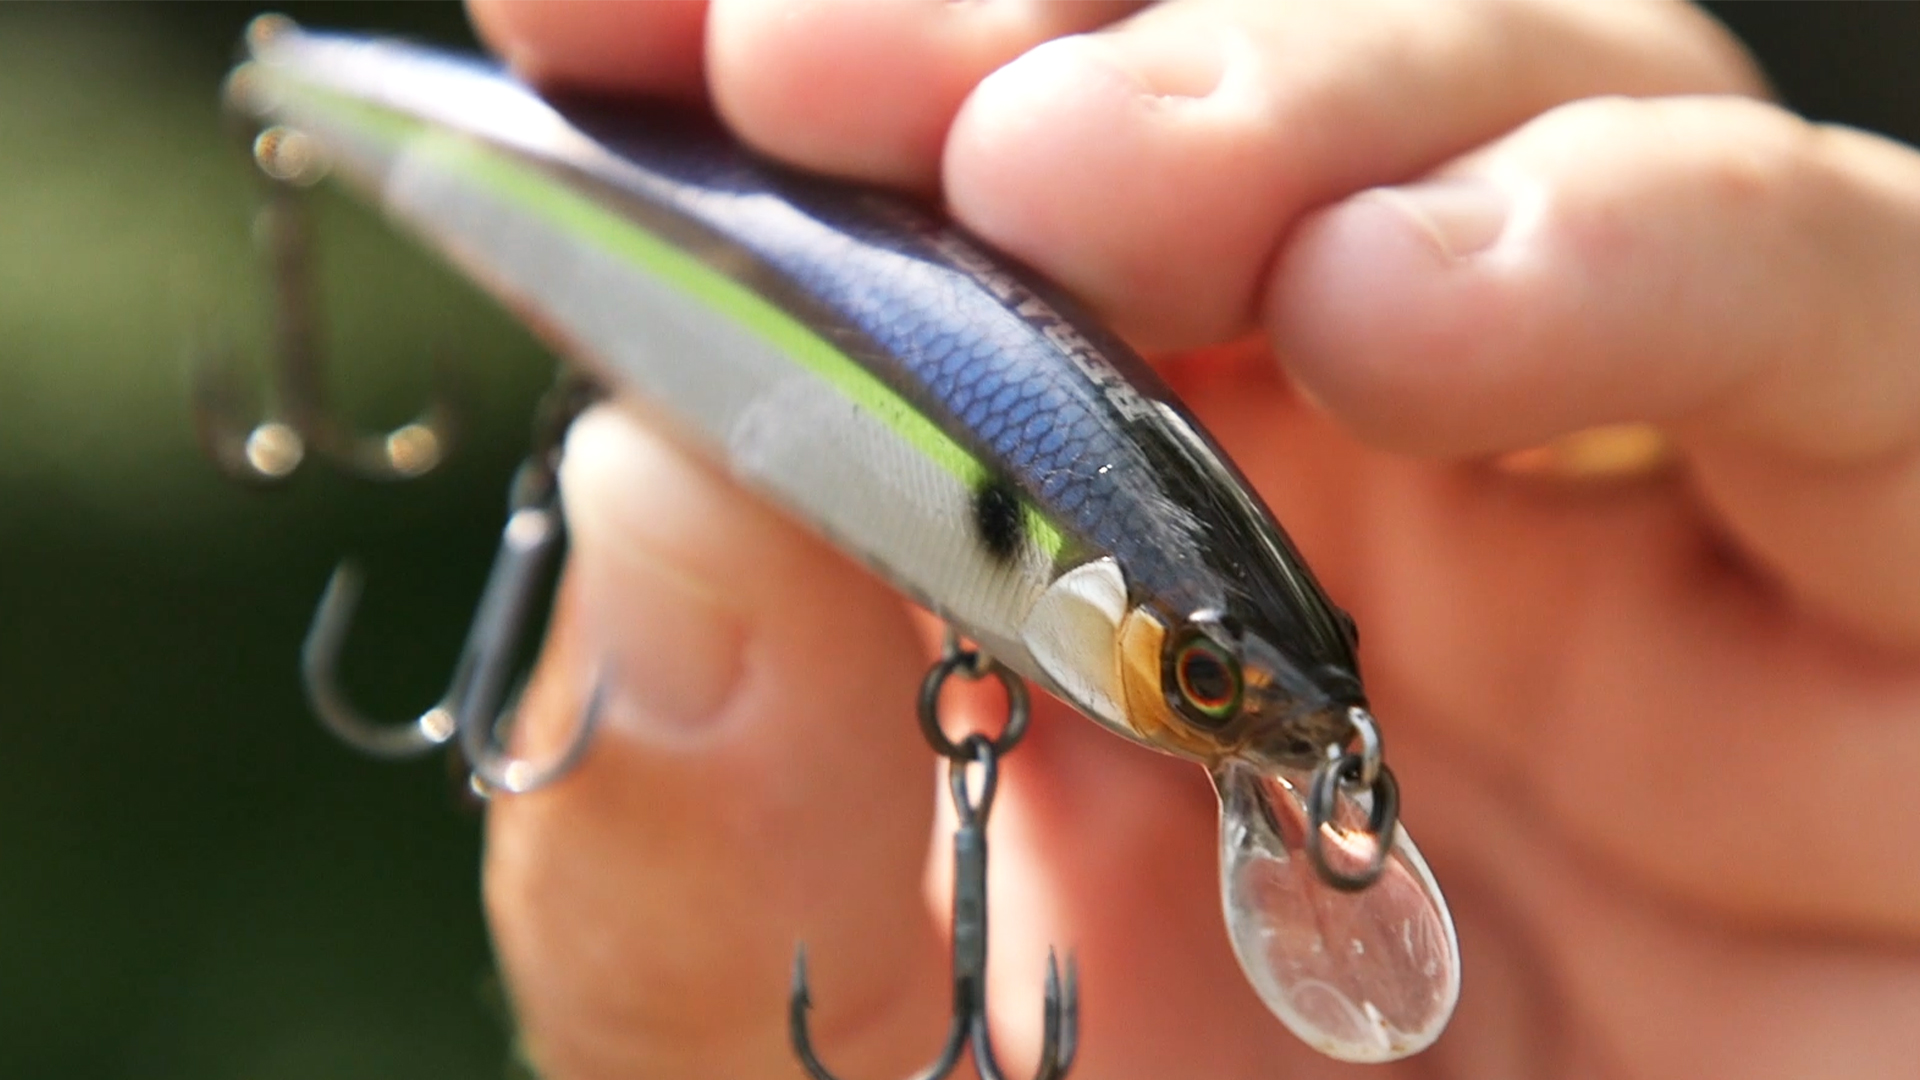 Ask the Anglers: What's Your Go-To Wintertime Bait? - Major League